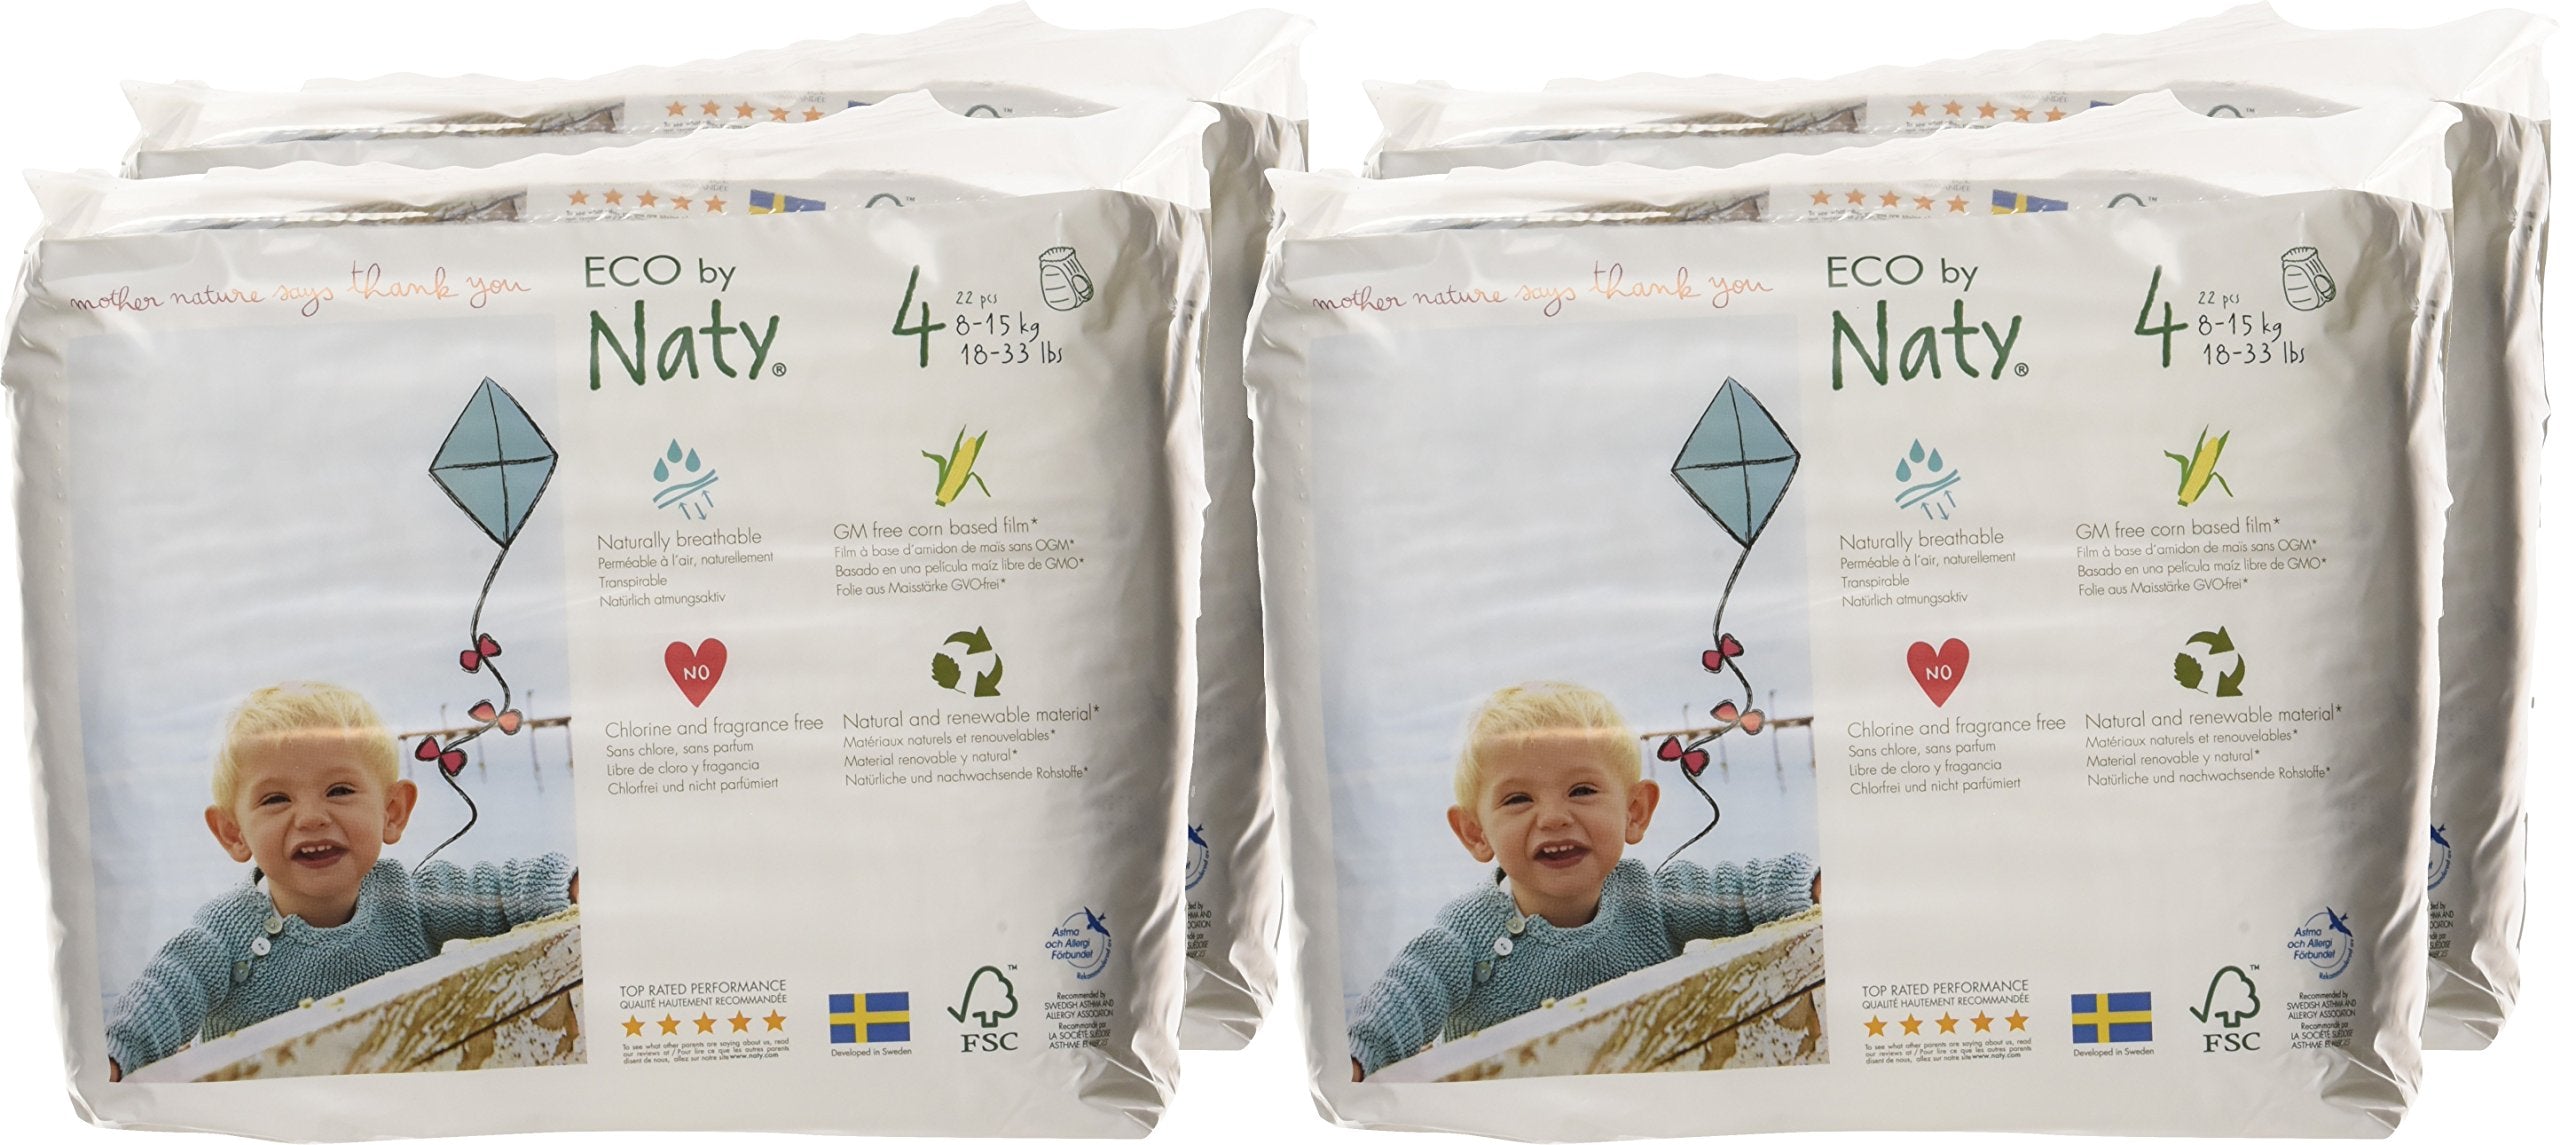 Eco by Naty Nappy Pants - Hypoallergenic and Chemical-Free Pull Ups, Highly Absorbent and Eco Friendly Training Nappies for Boys and Girls (Size 4, 8-15Kg) 22 Count